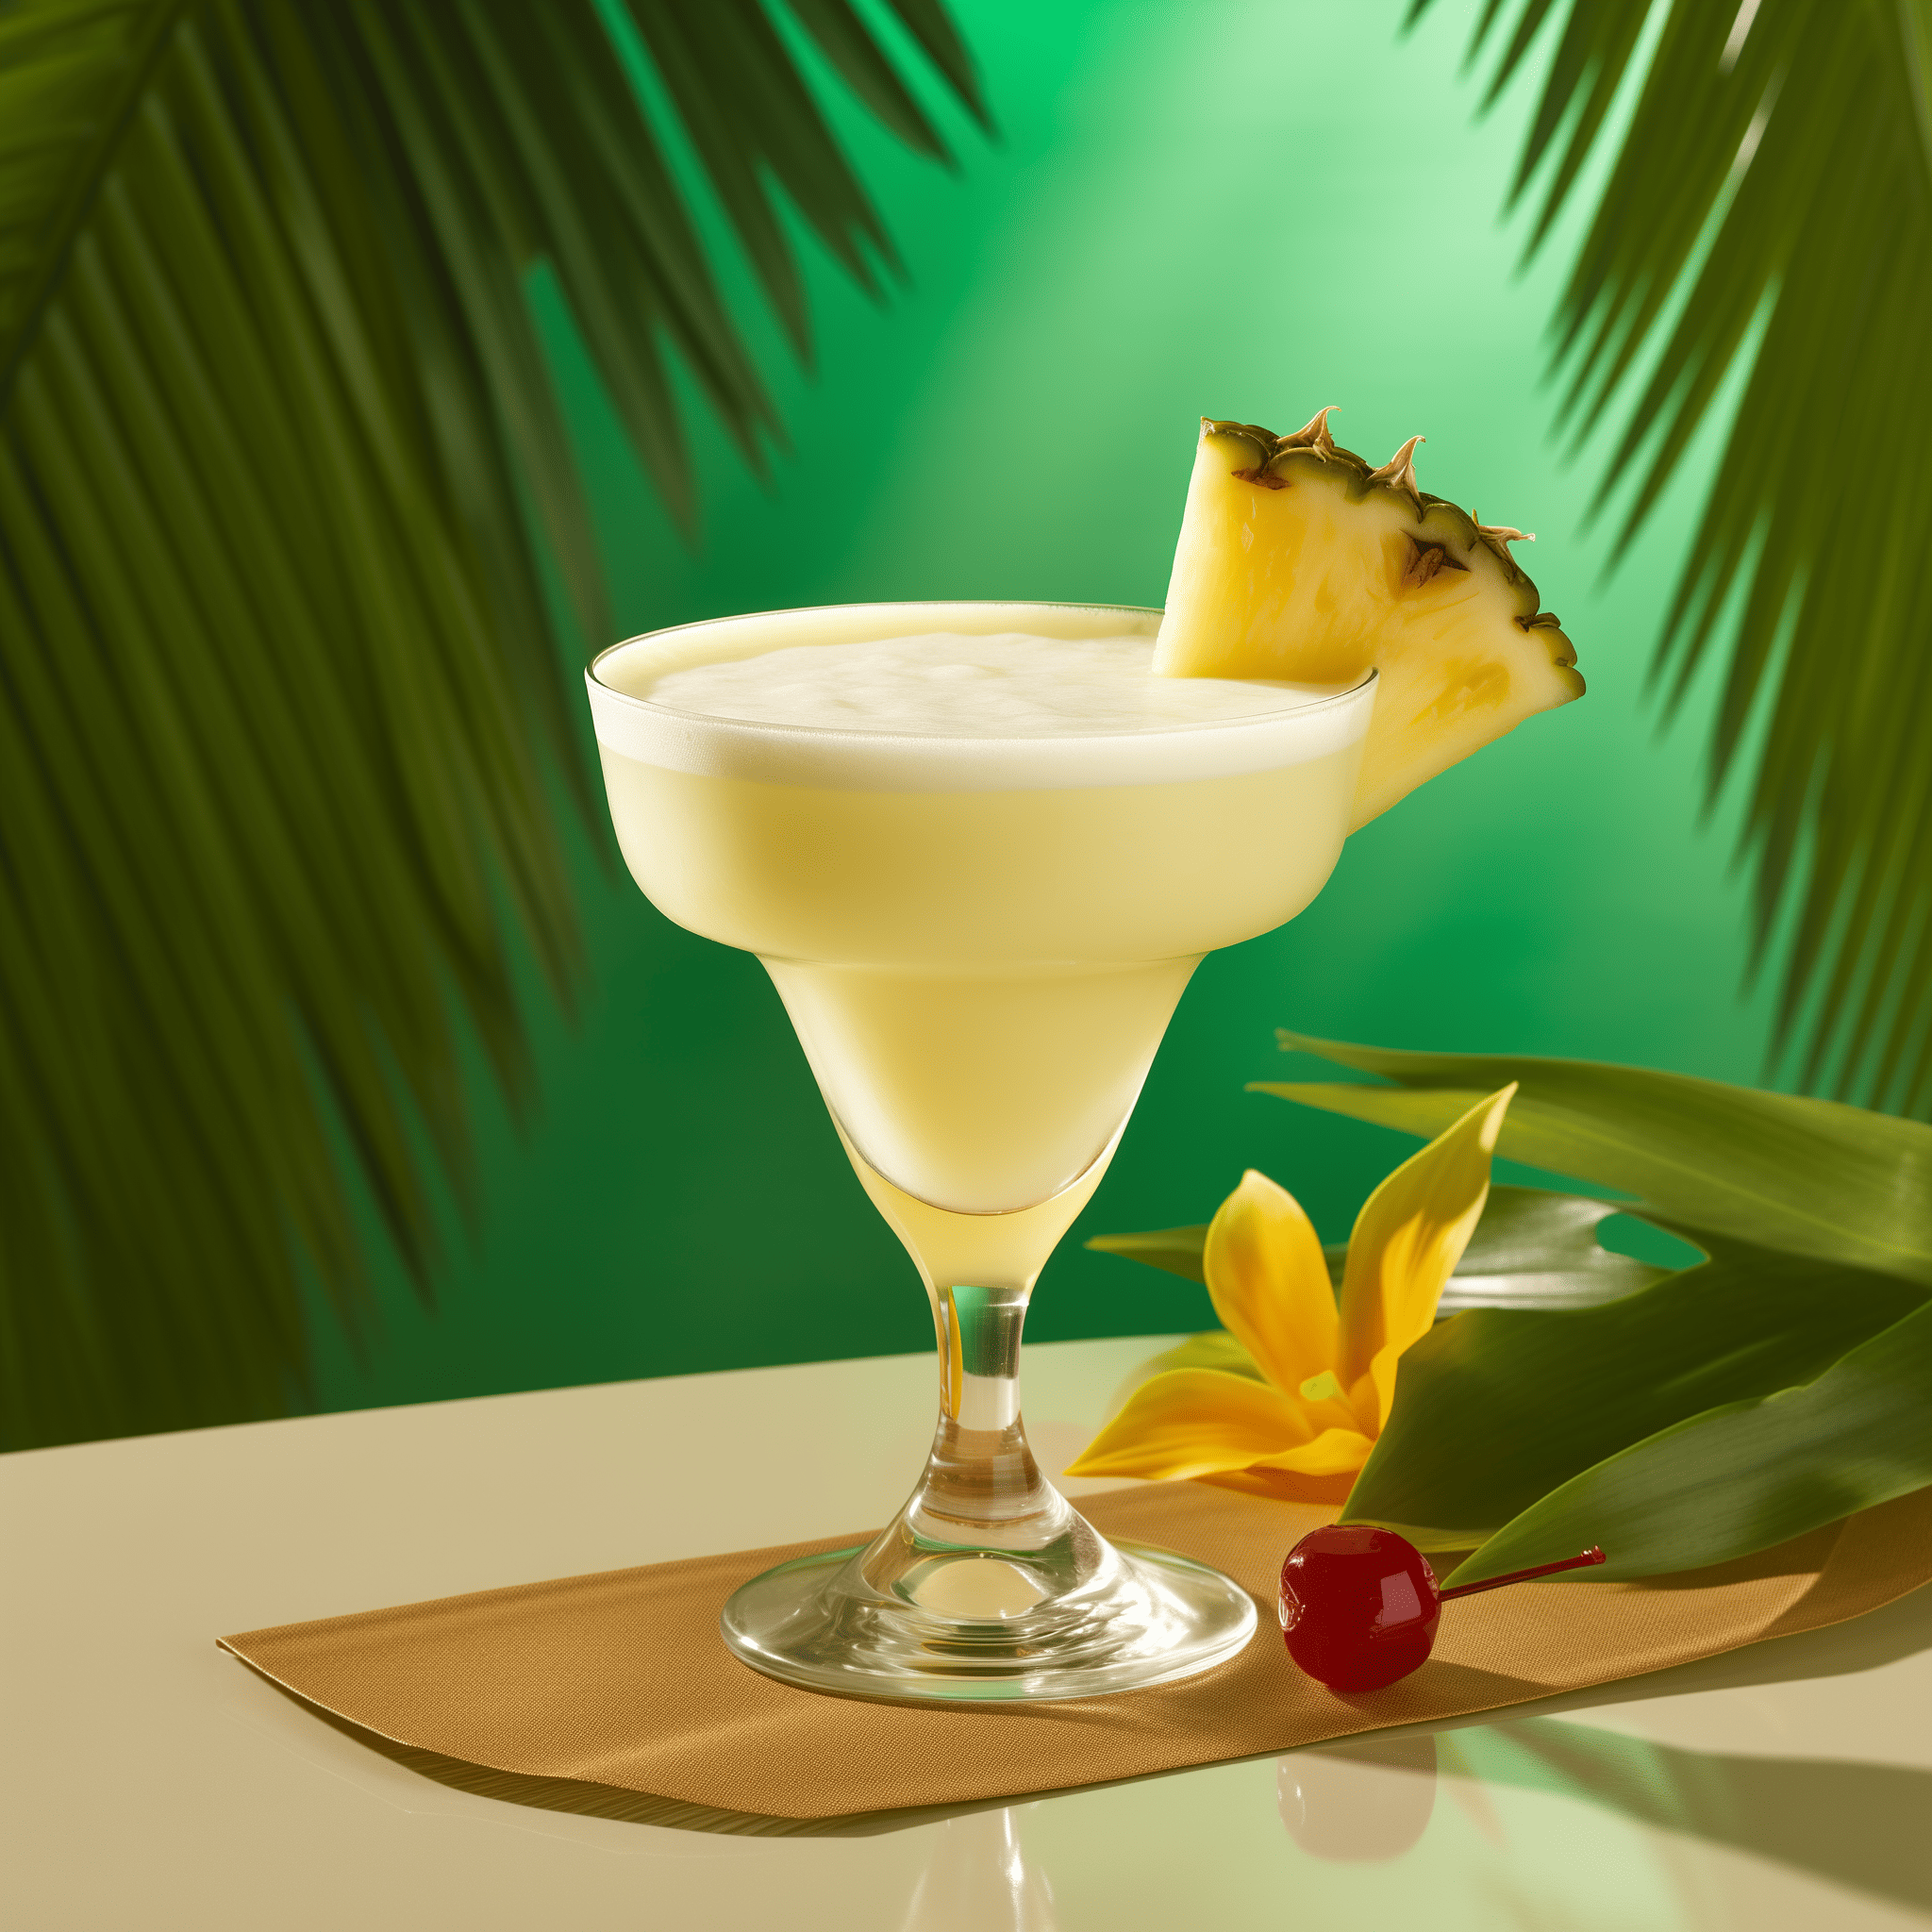 Bahia Cocktail Recipe - The Bahia cocktail offers a creamy, sweet, and tropical flavor profile with a subtle hint of coconut. The pineapple juice provides a tangy fruitiness that balances the richness of the coconut cream, while the white rum adds a smooth, spirited kick.